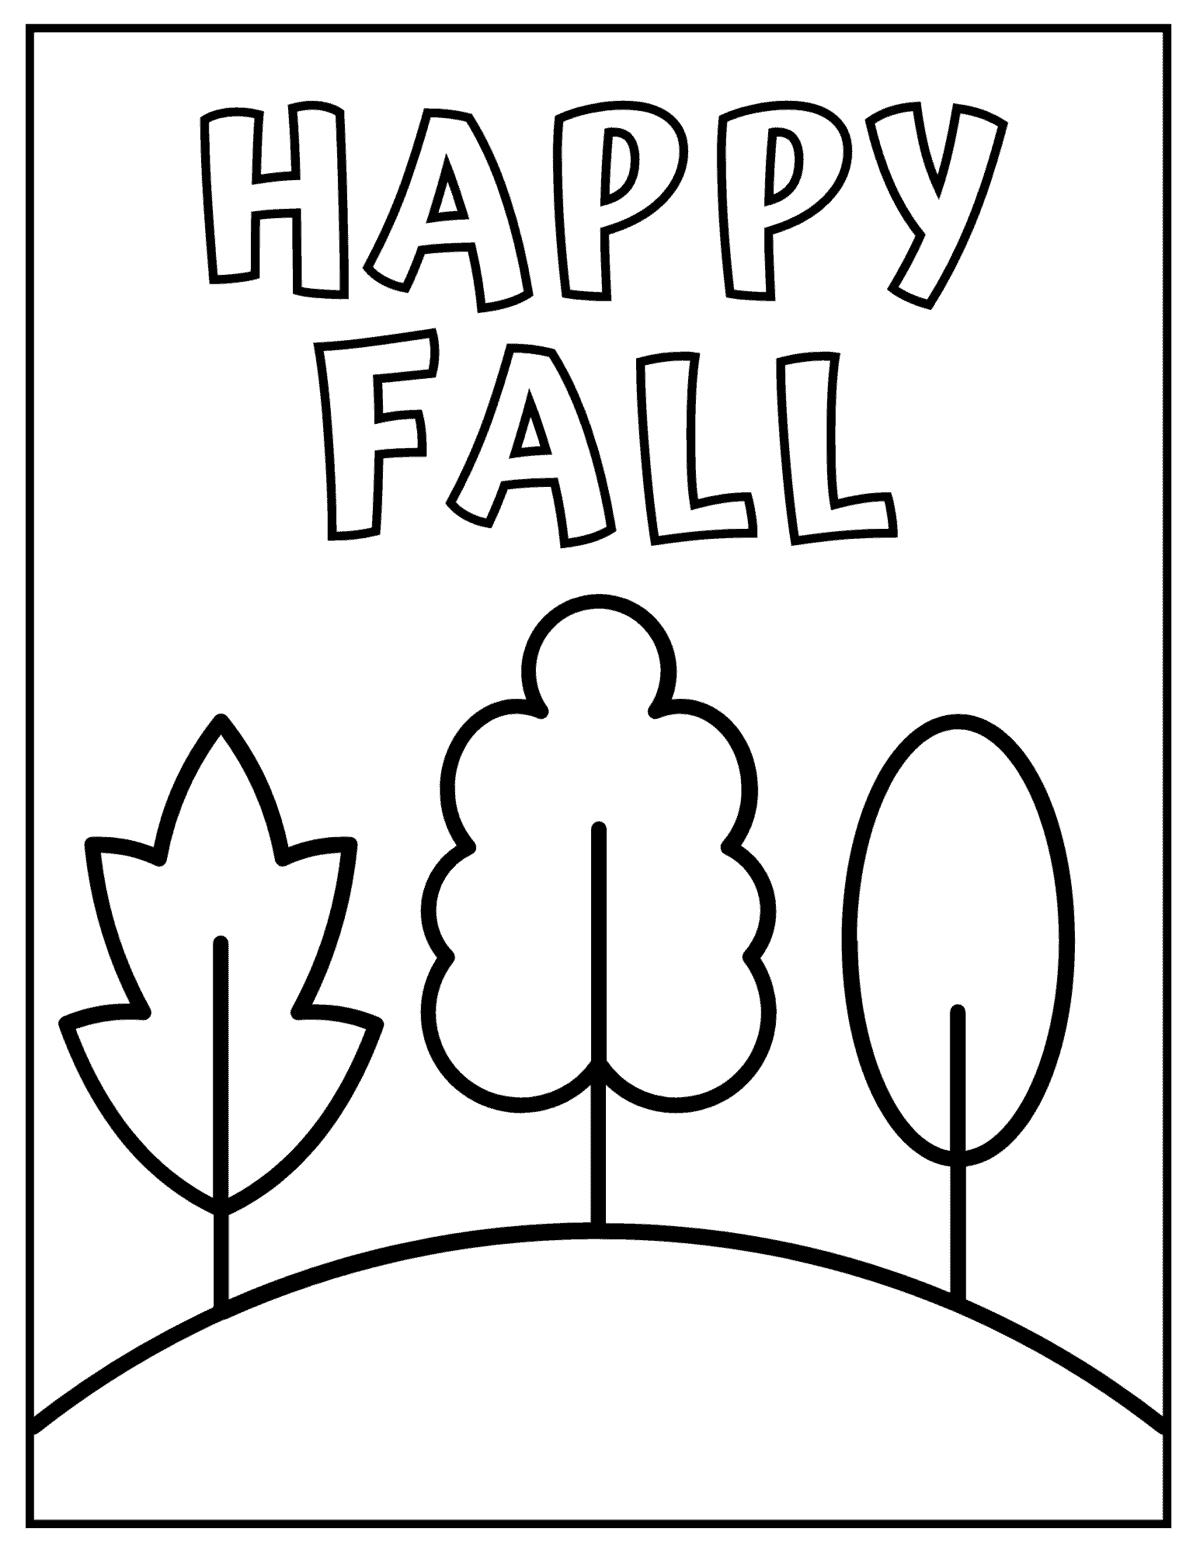 https://www.prudentpennypincher.com/wp-content/uploads/2022/06/happy-fall.png